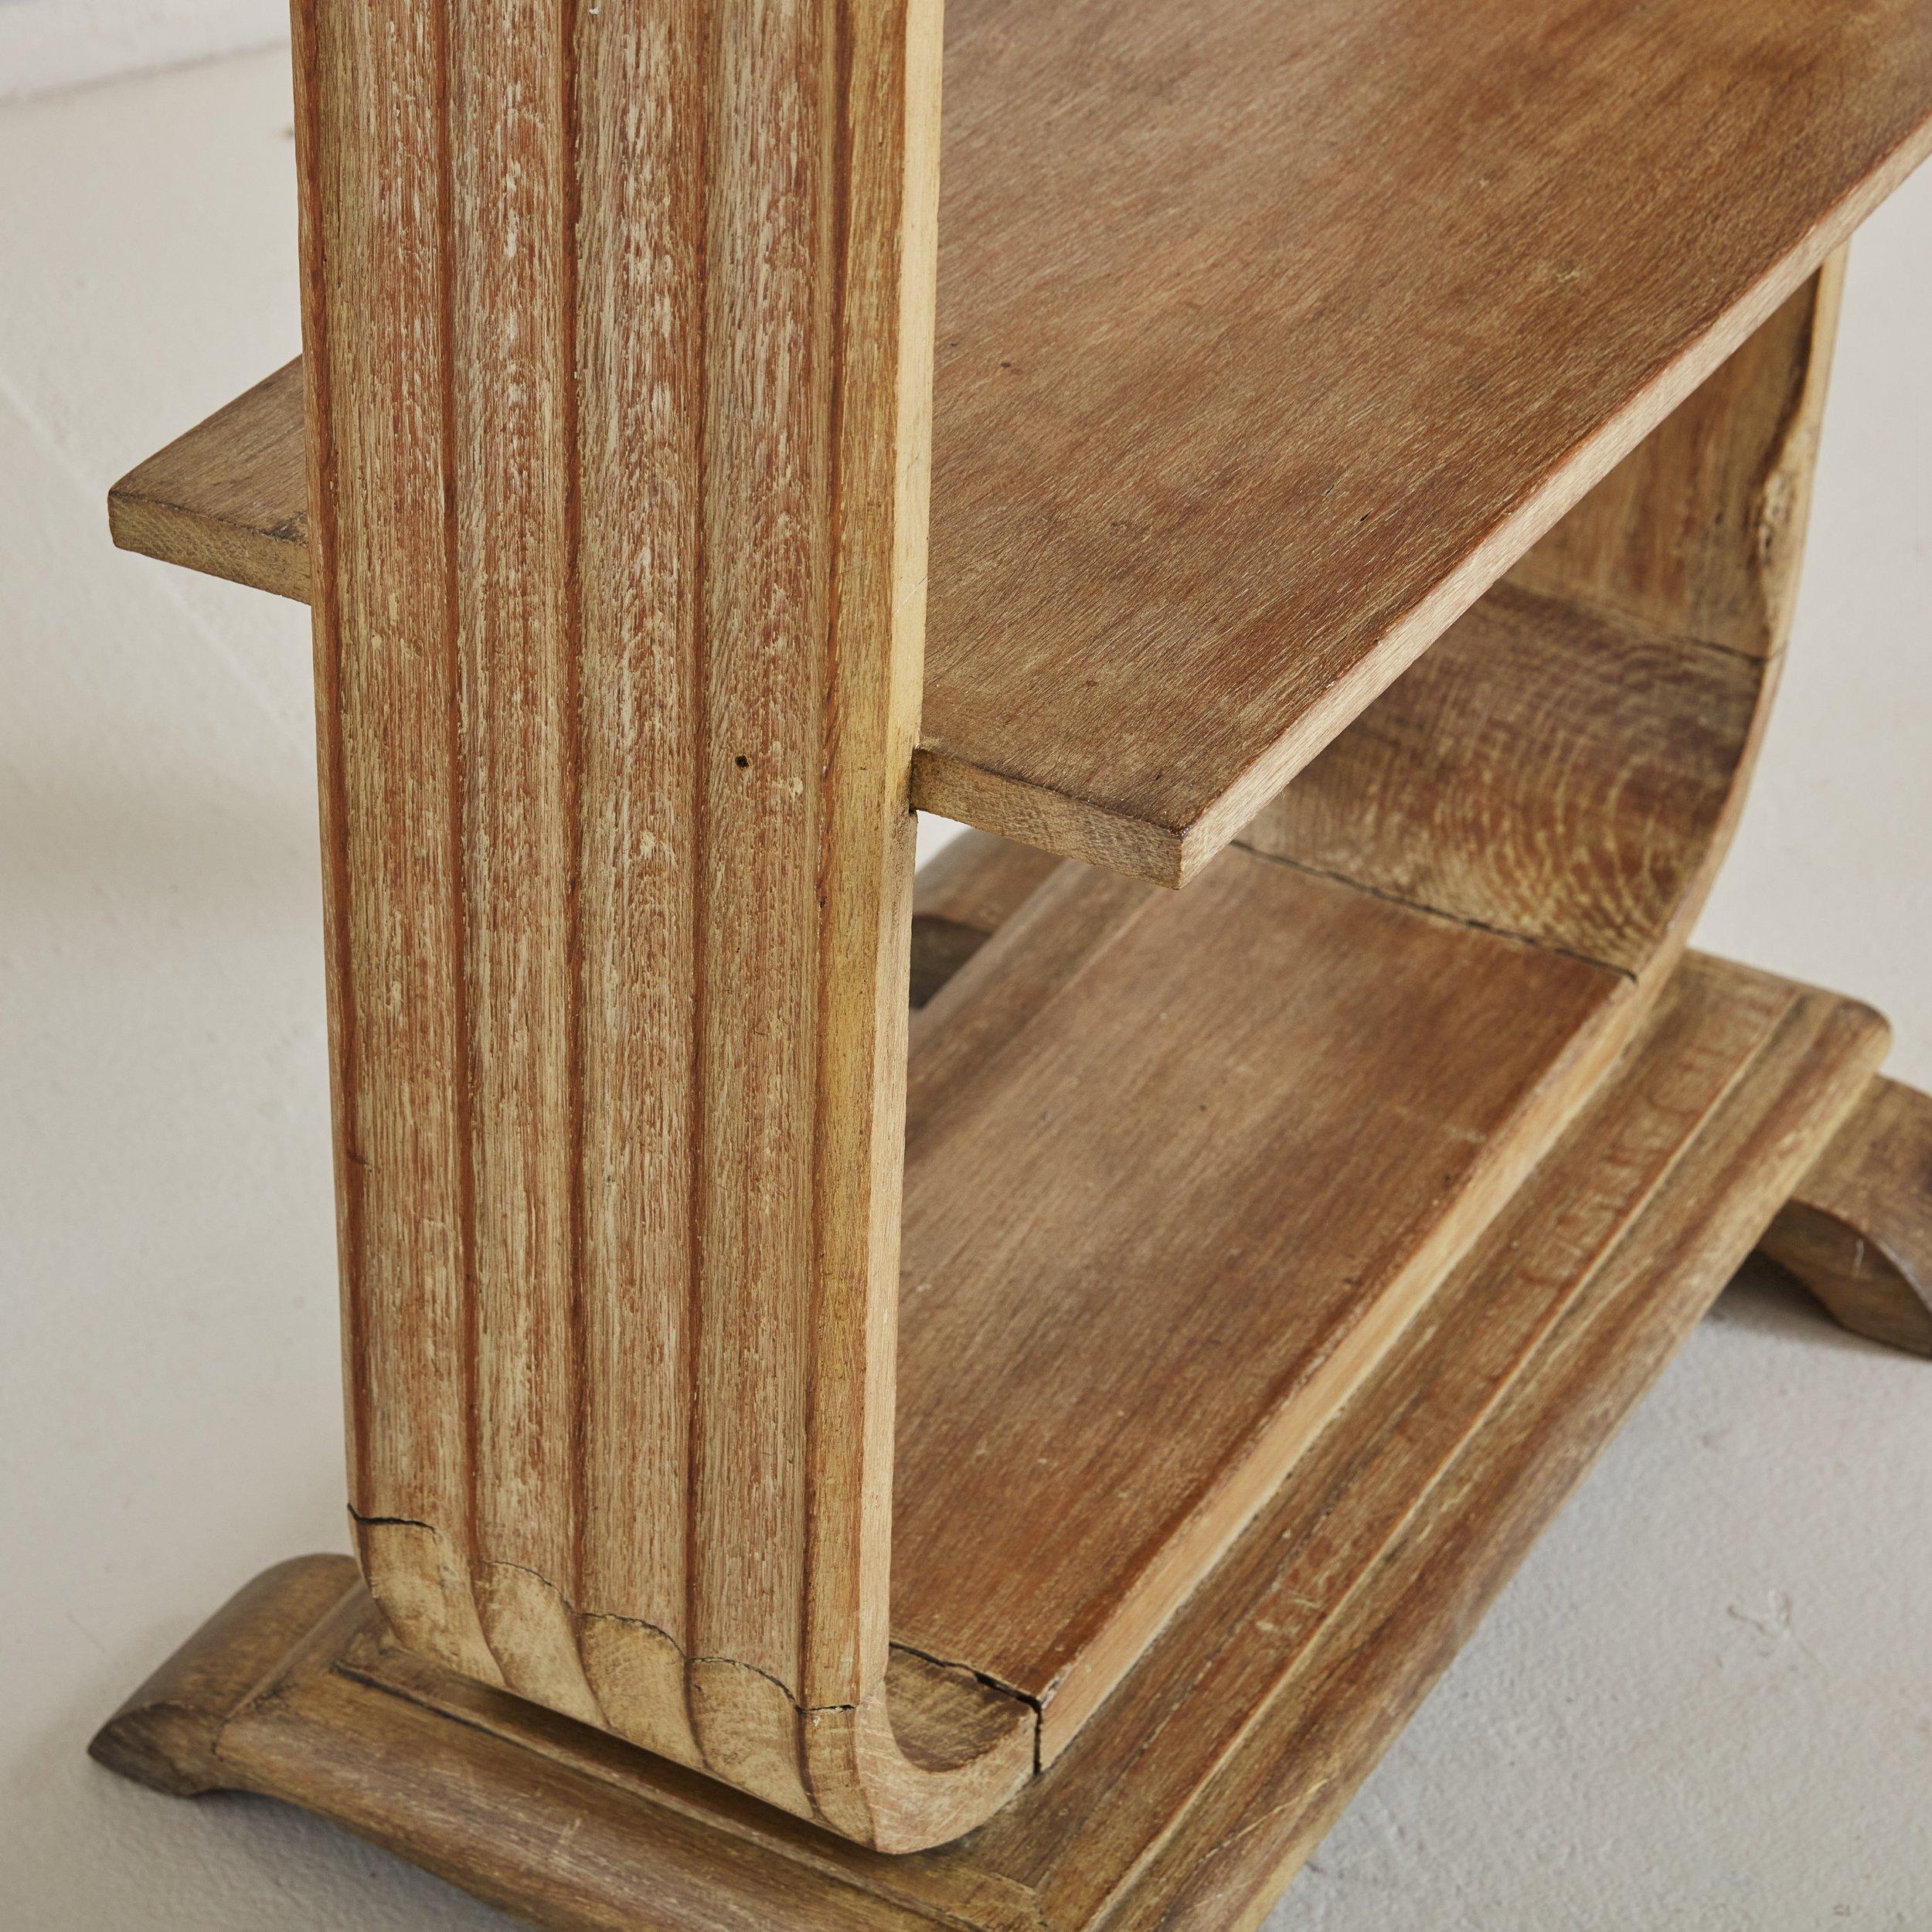 Mid-20th Century Art Deco Wood Side Table with 3 Shelves, France 1940s For Sale